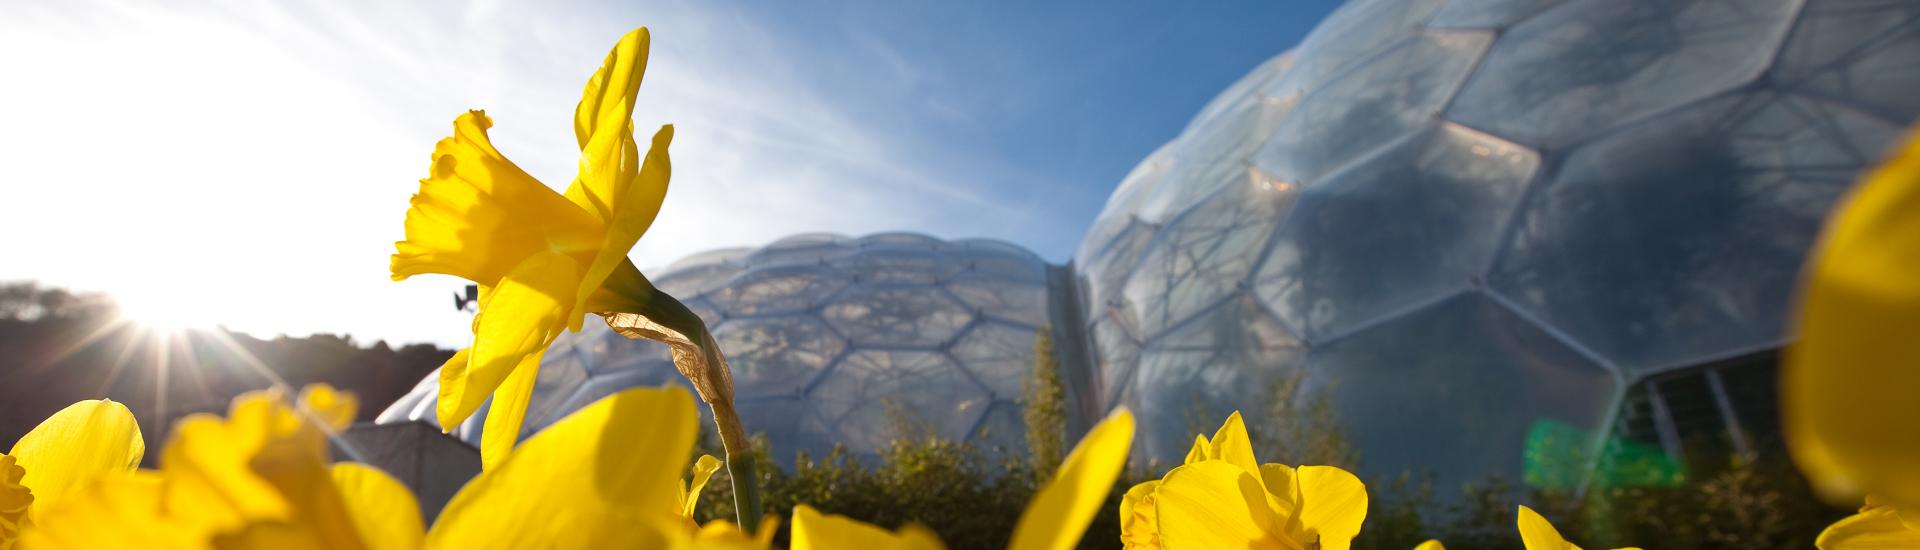 Biomes in the background and daffodils in the foreground